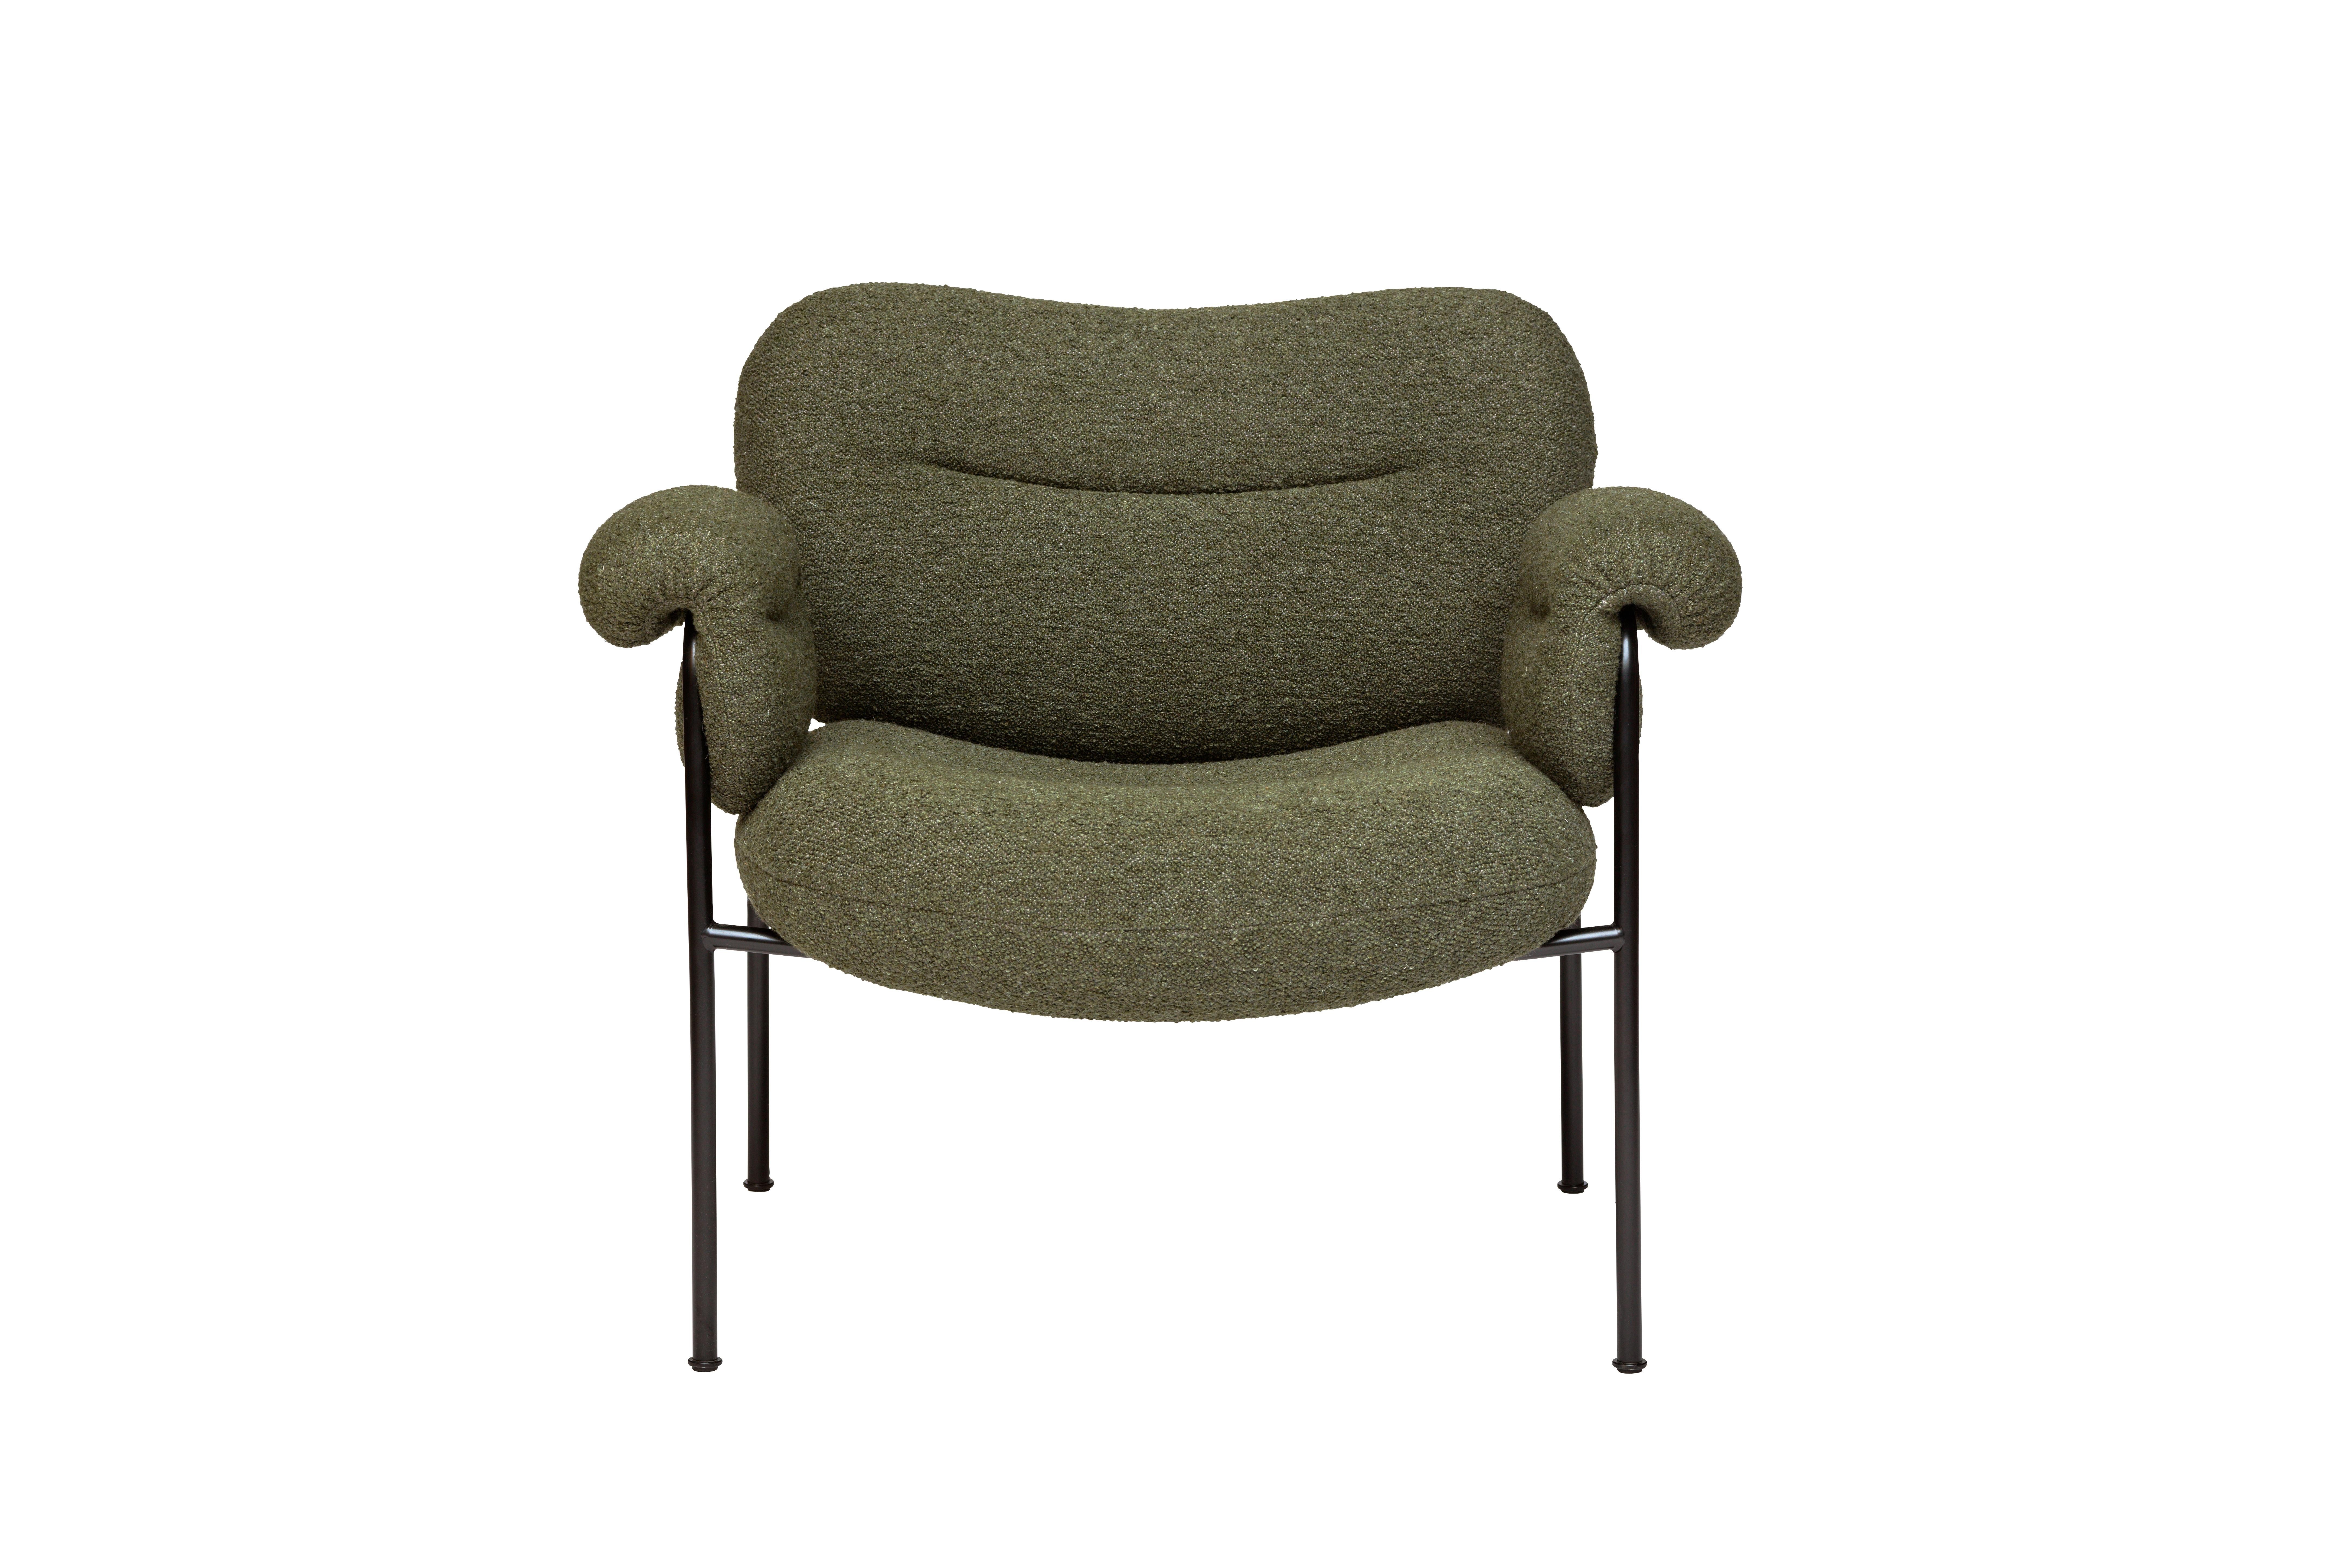 Bollo Armchair by Andreas Engesvik for FOGIA

Model shown on main images: White steel legs + Fabric: Barnum Bouclé col.09

Width: 81cm /32in
Depth: 81cm /32in
Height: 71cm /28in
Seat Height: 42.5cm /17in
Seat Depth: 54cm / 21in

The iconic Bollo